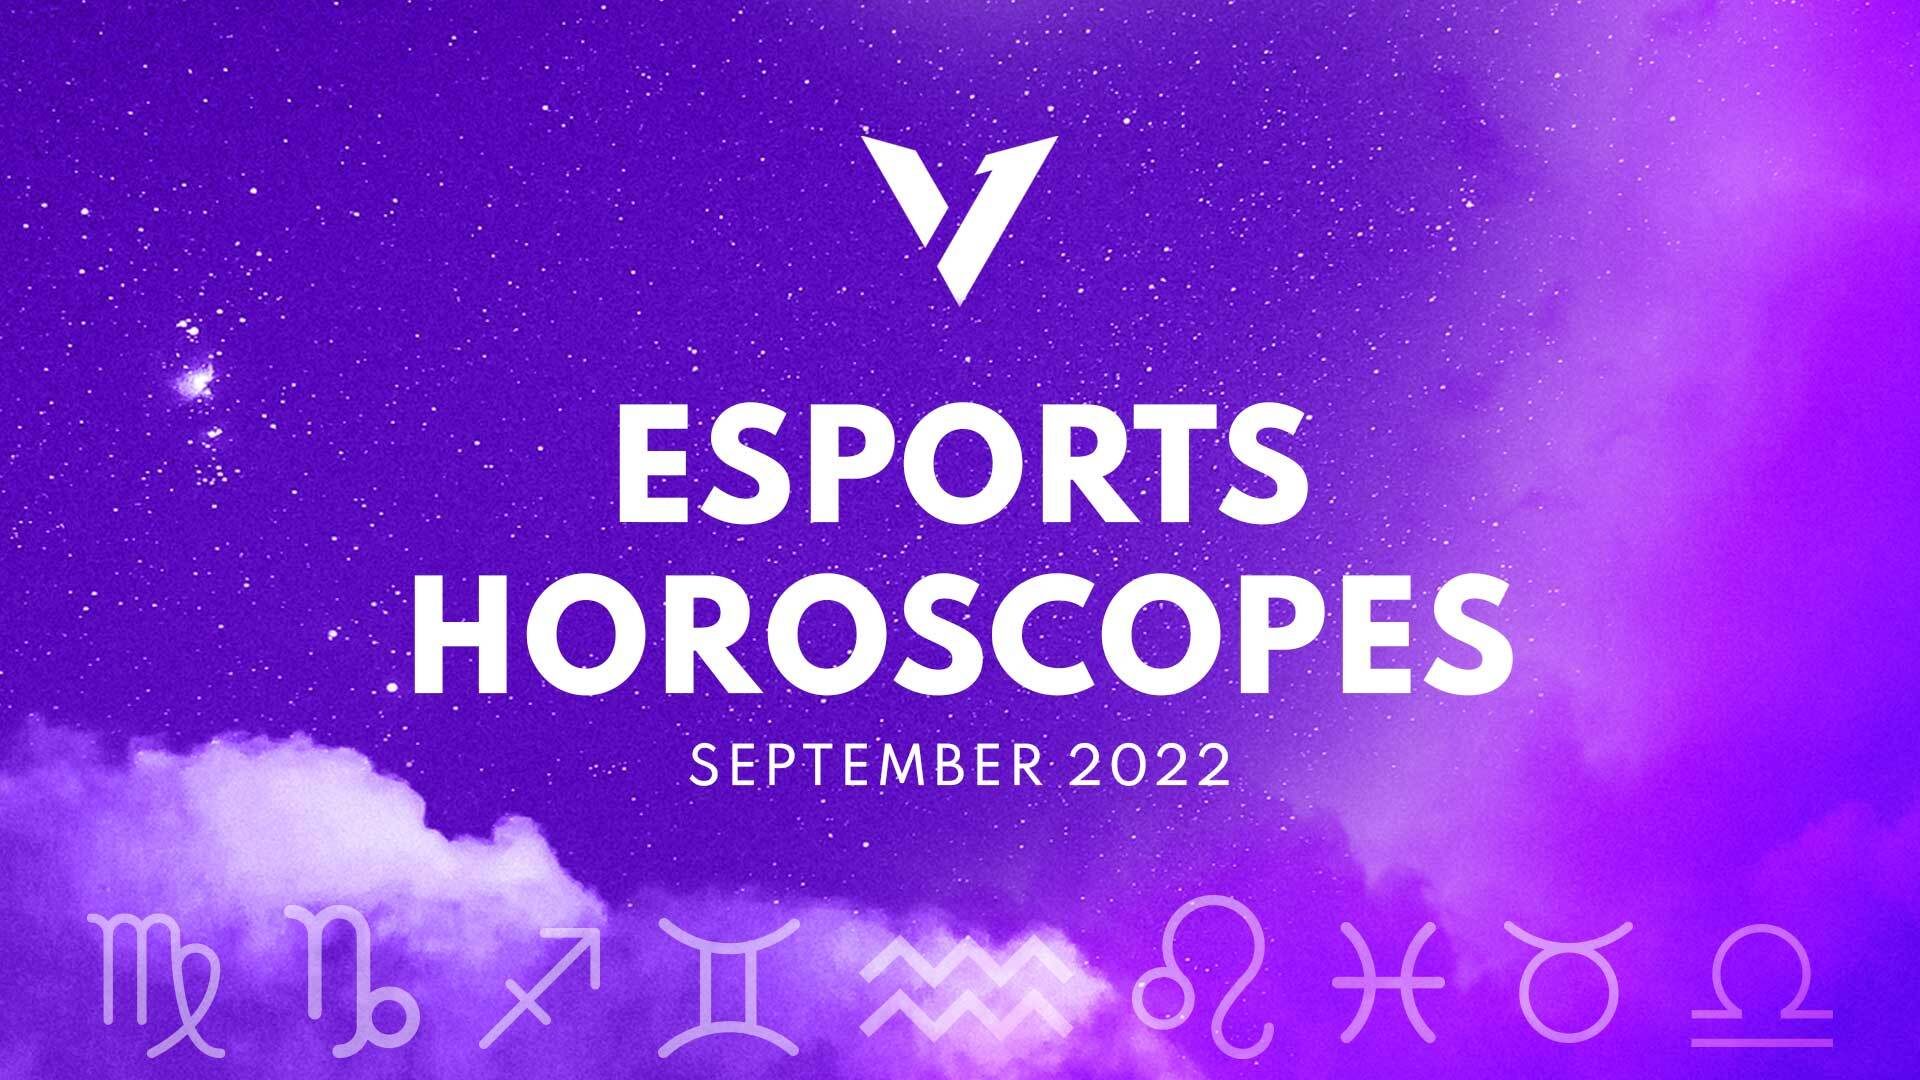 Version1 logo at the top of the image. Text: "Esports Horoscopes September 2022." Starry purple background. All twelve astrological signs are in a row at the bottom.